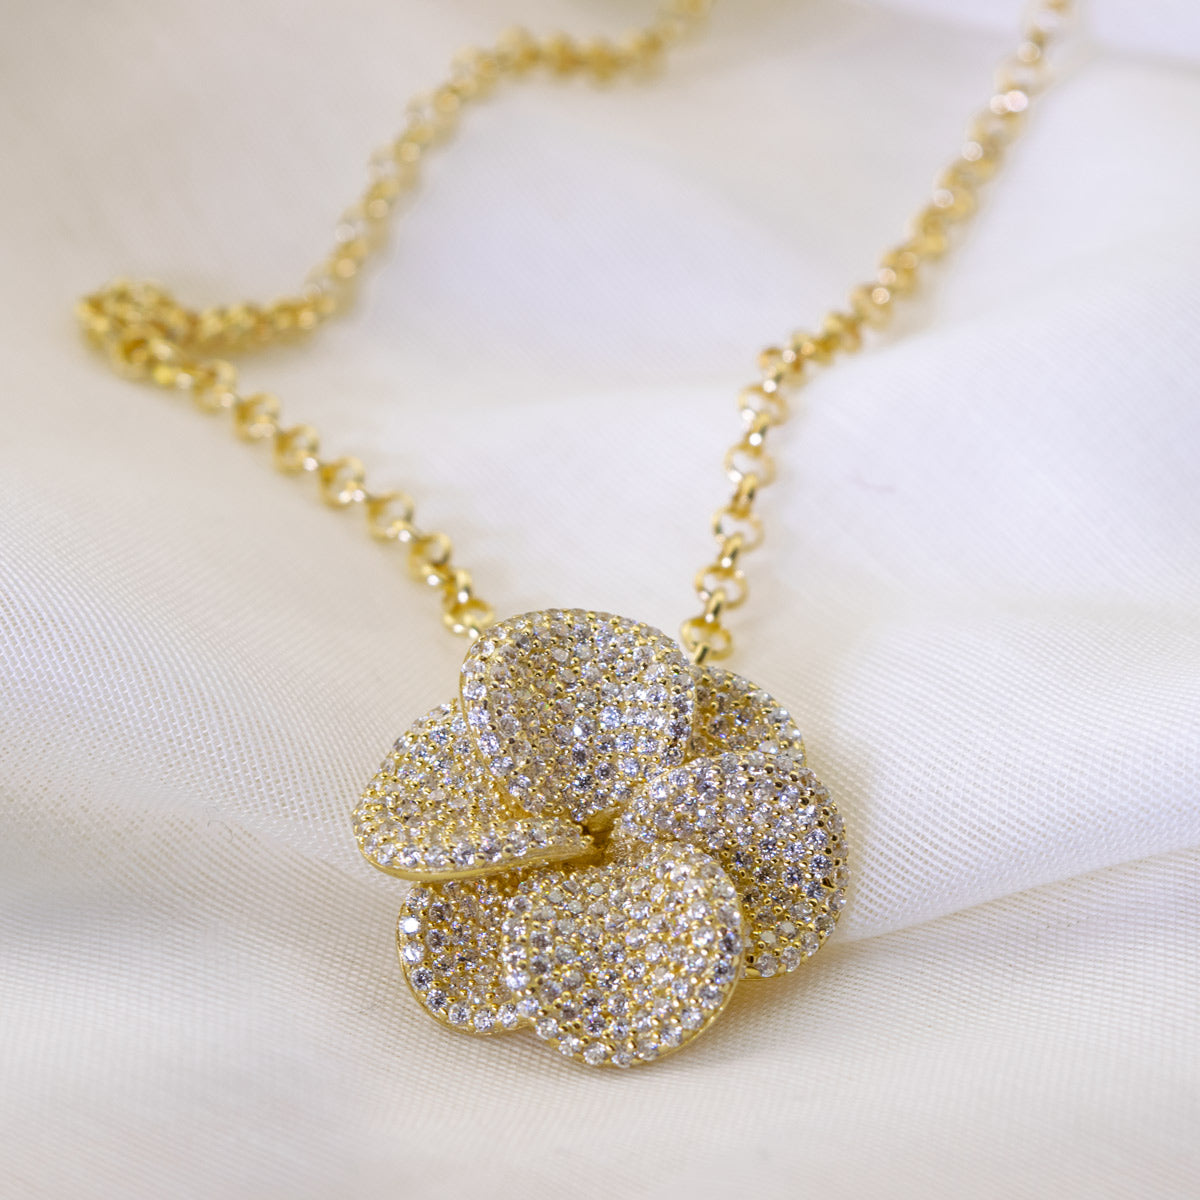 Forget Me Not in 22KT Gold Vermeil Necklace